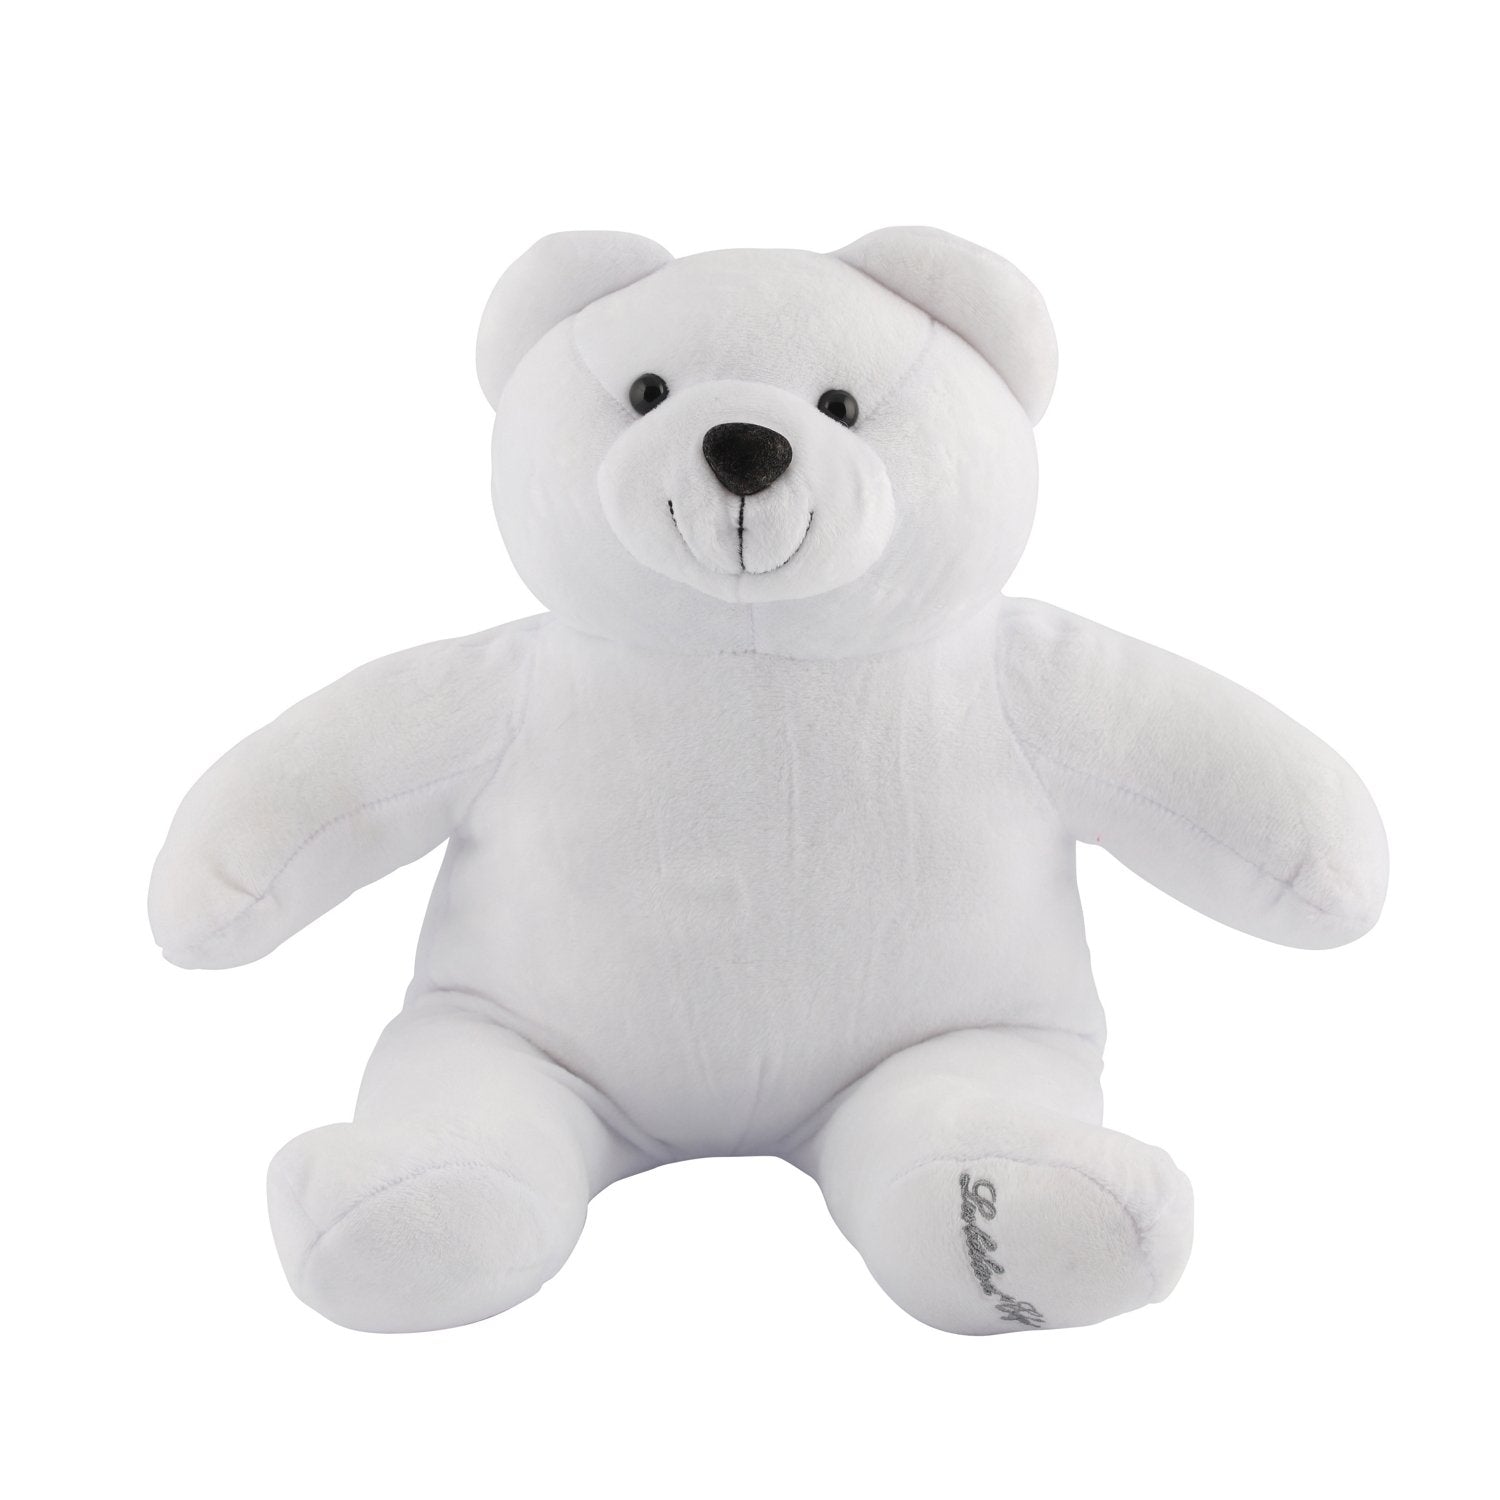 grosse peluche ours blanc